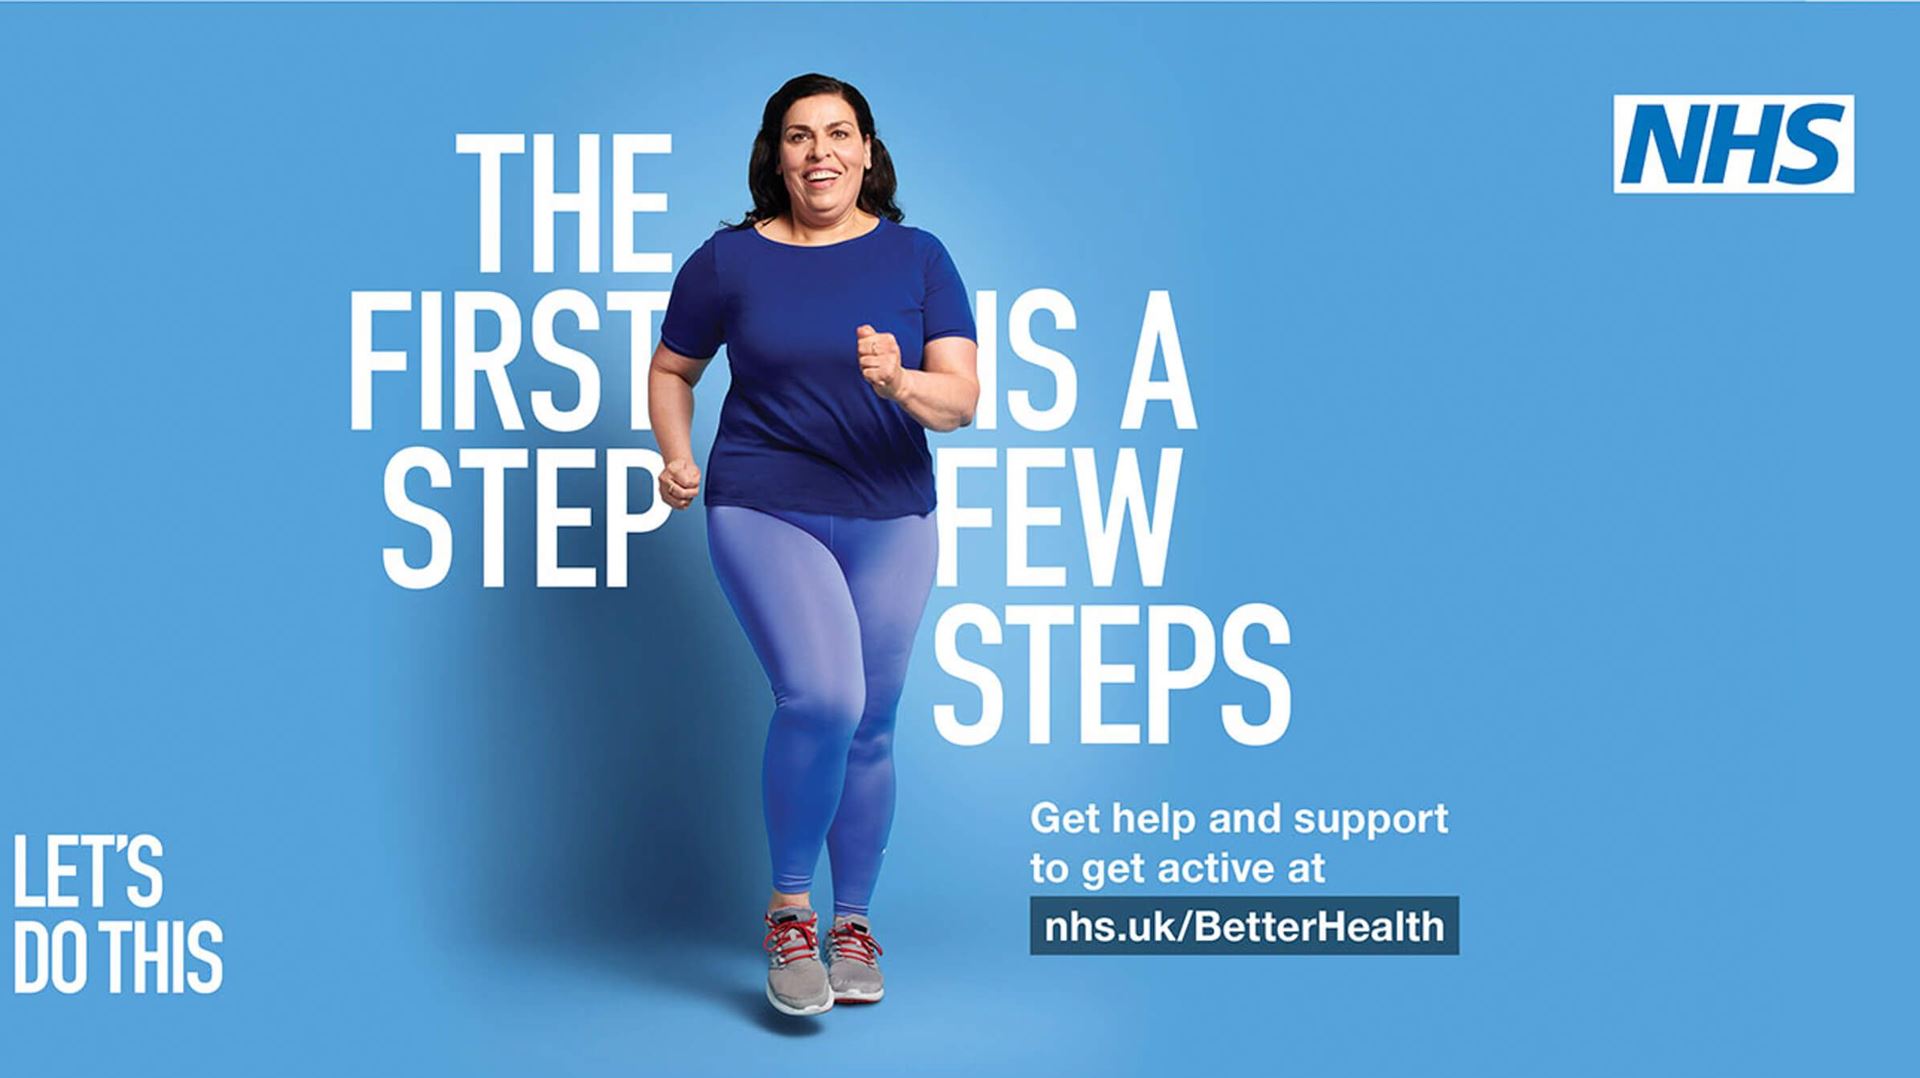 The NHS logo, a woman running in place and the words the first step is a few steps